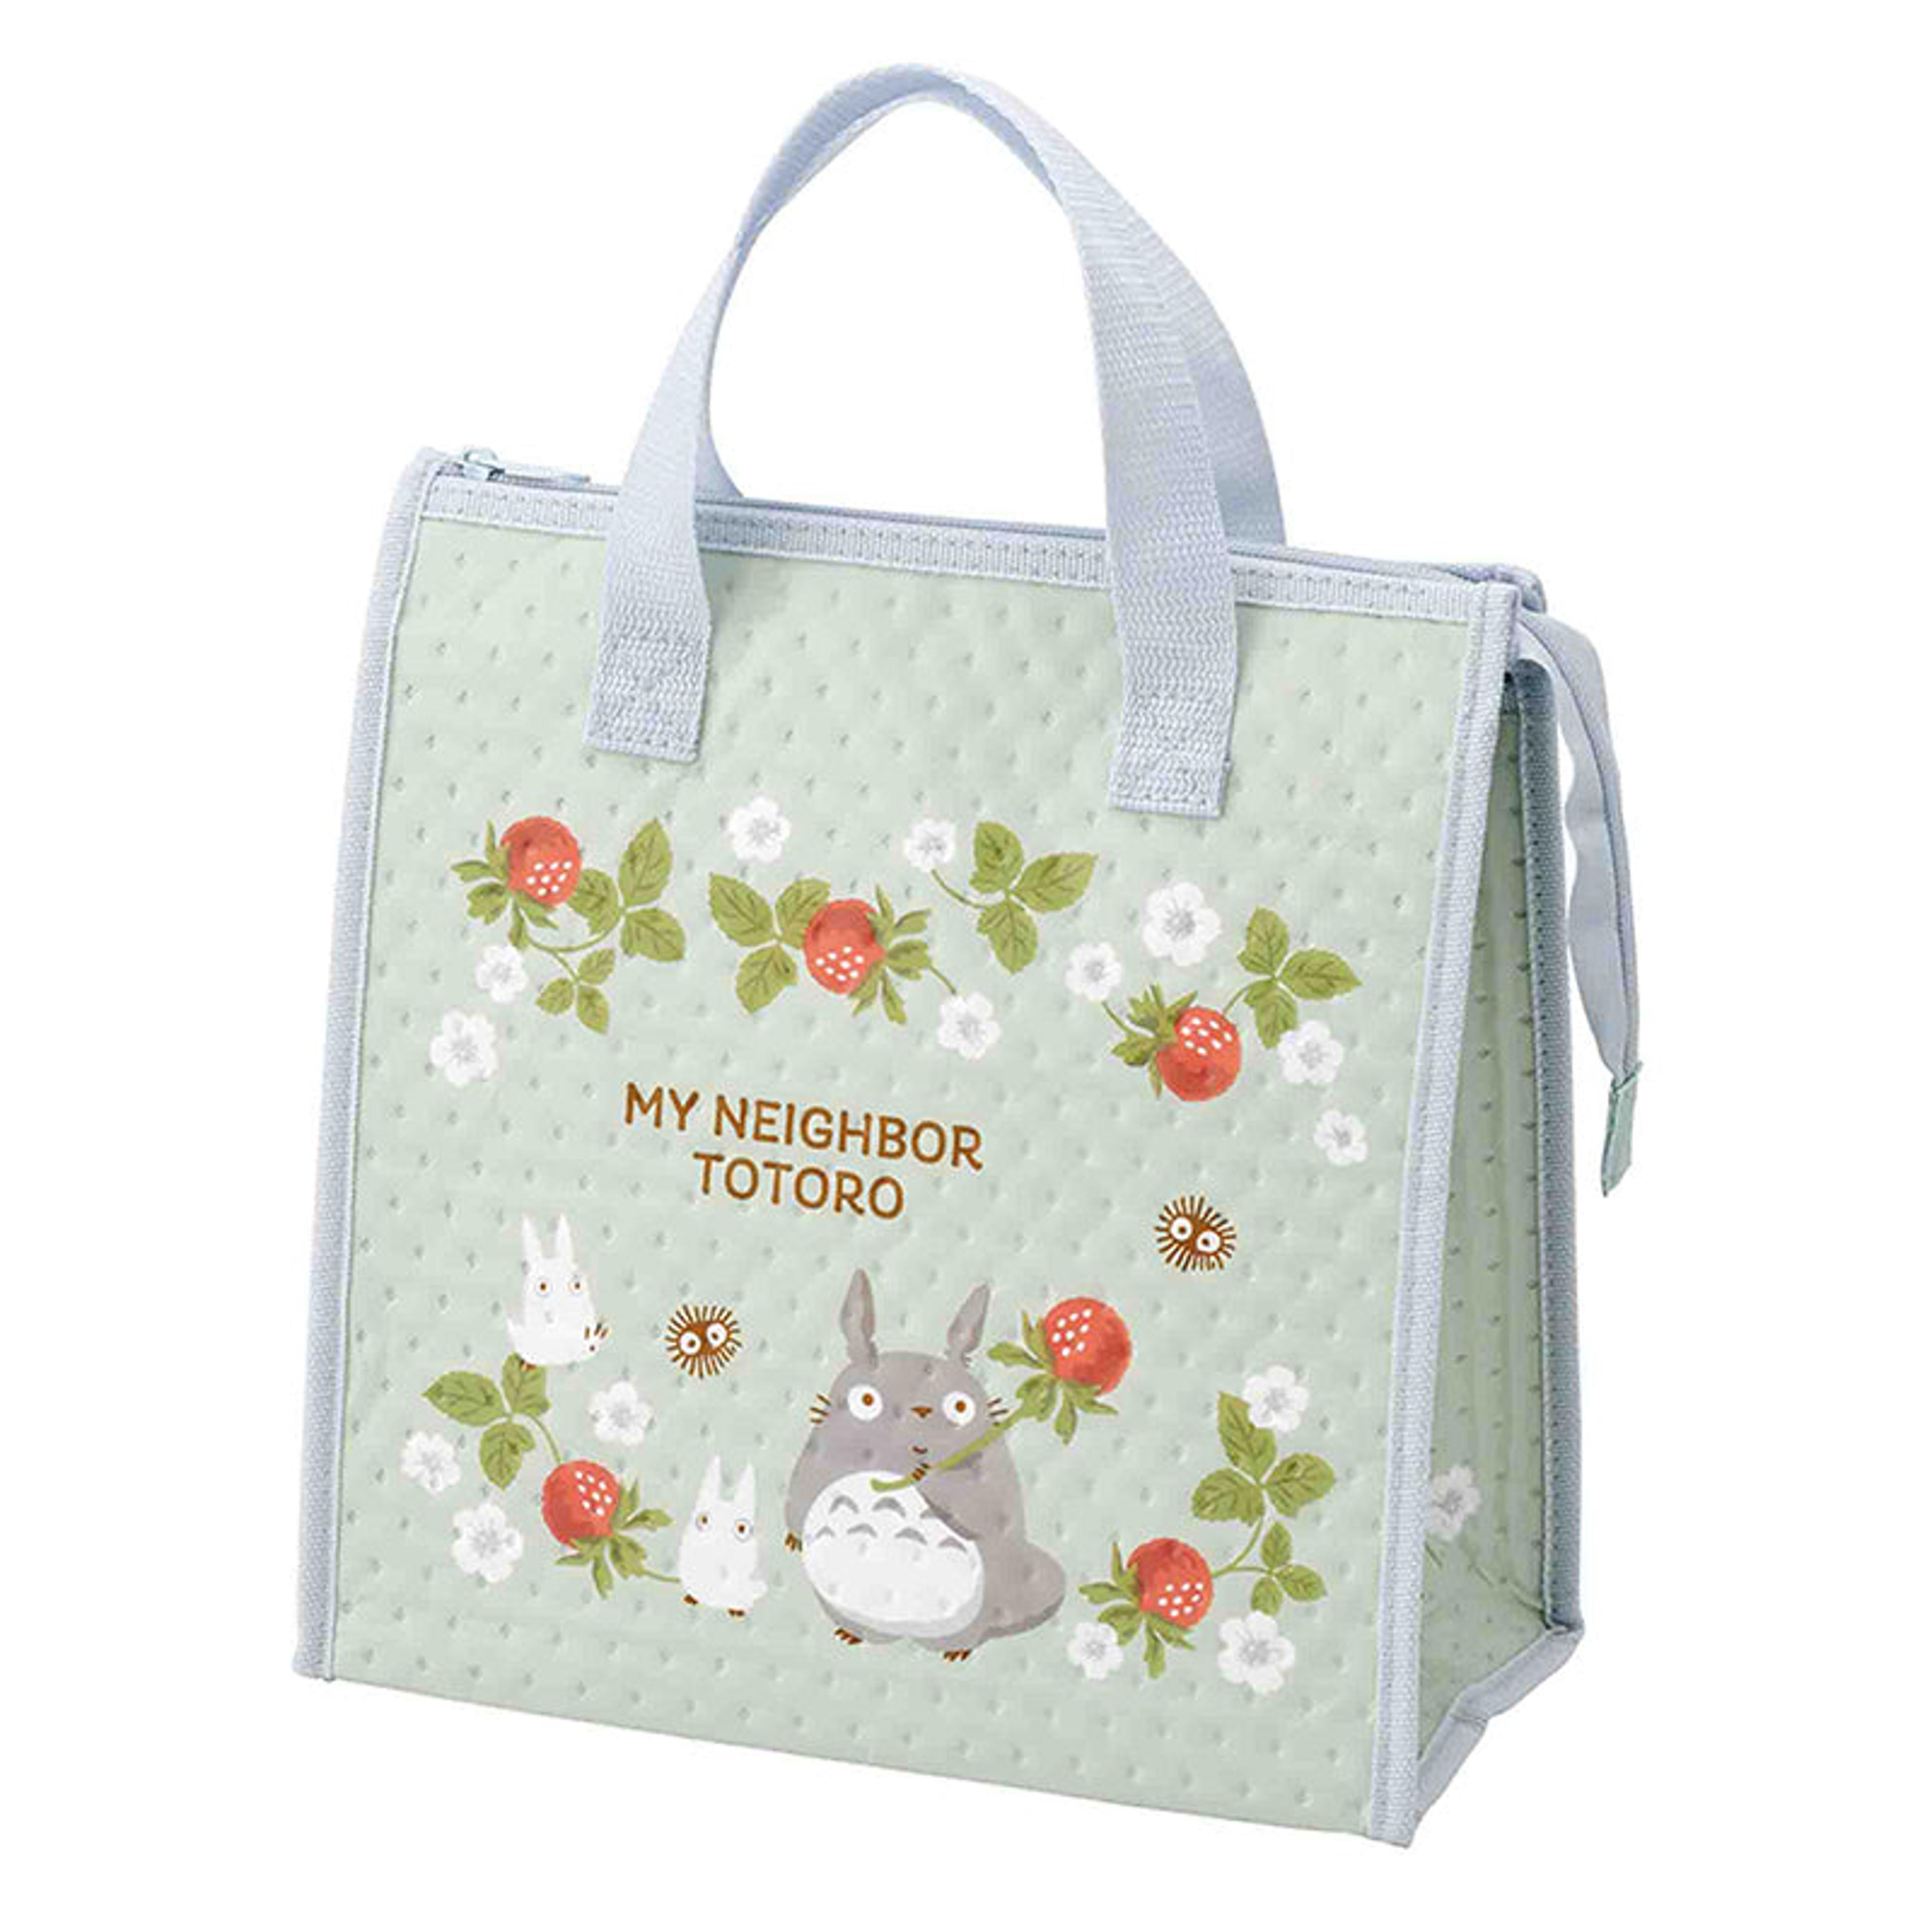 My Neighbor Totoro with Raspberries Insulated Lunch Bag